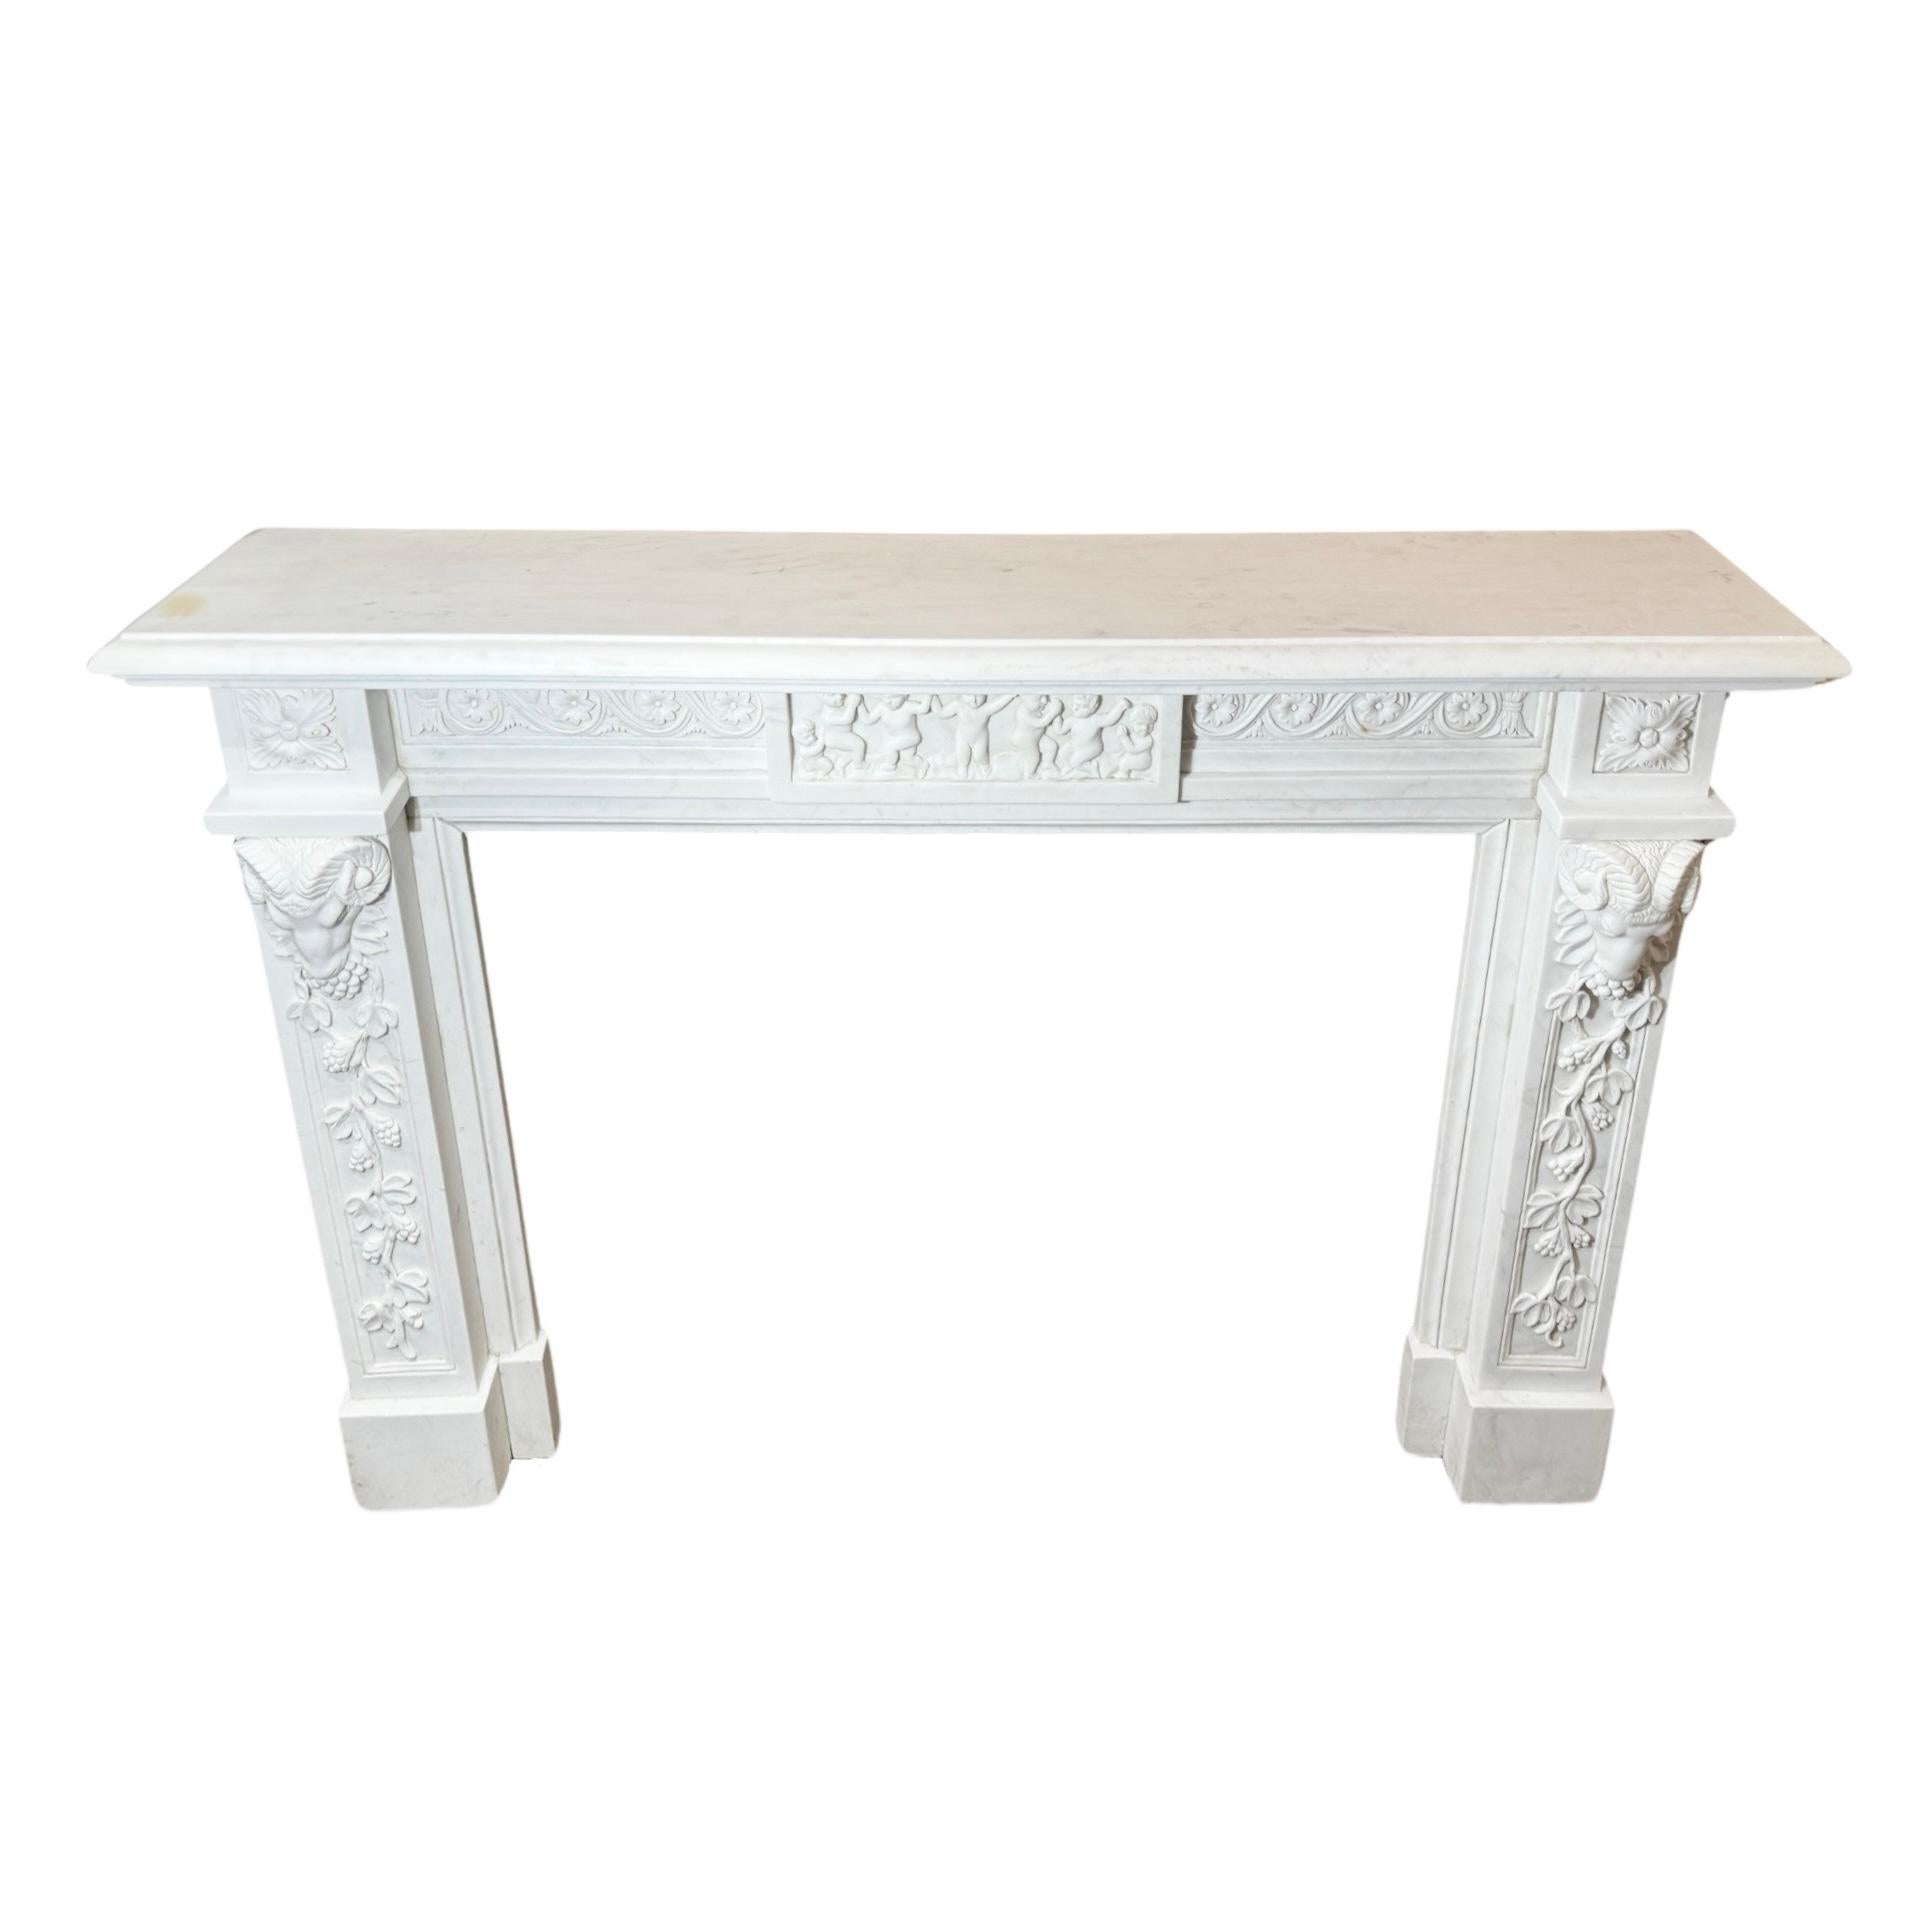 Expertly crafted from beautiful Italian White Veined Carrara Marble, this 18th century Louis the 16th style mantel features intricate cherub and floral carvings, along with rams head carvings on each leg. Elevate your fireplace with this luxurious